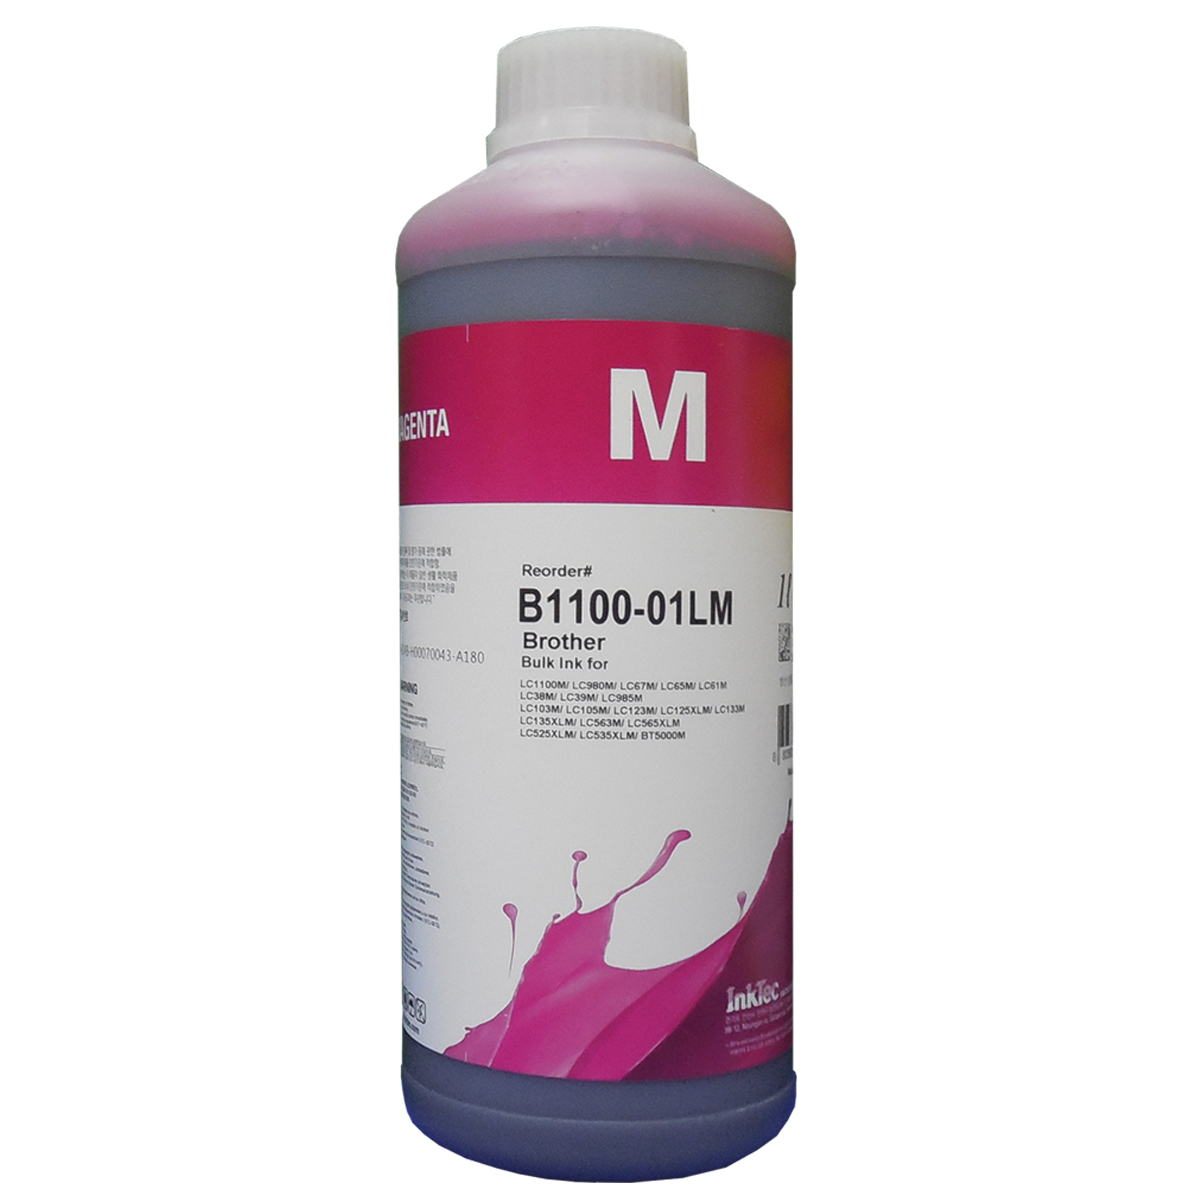 1 Litro de Tinta Dye InkTec Compatible Brother T300 T500 T700